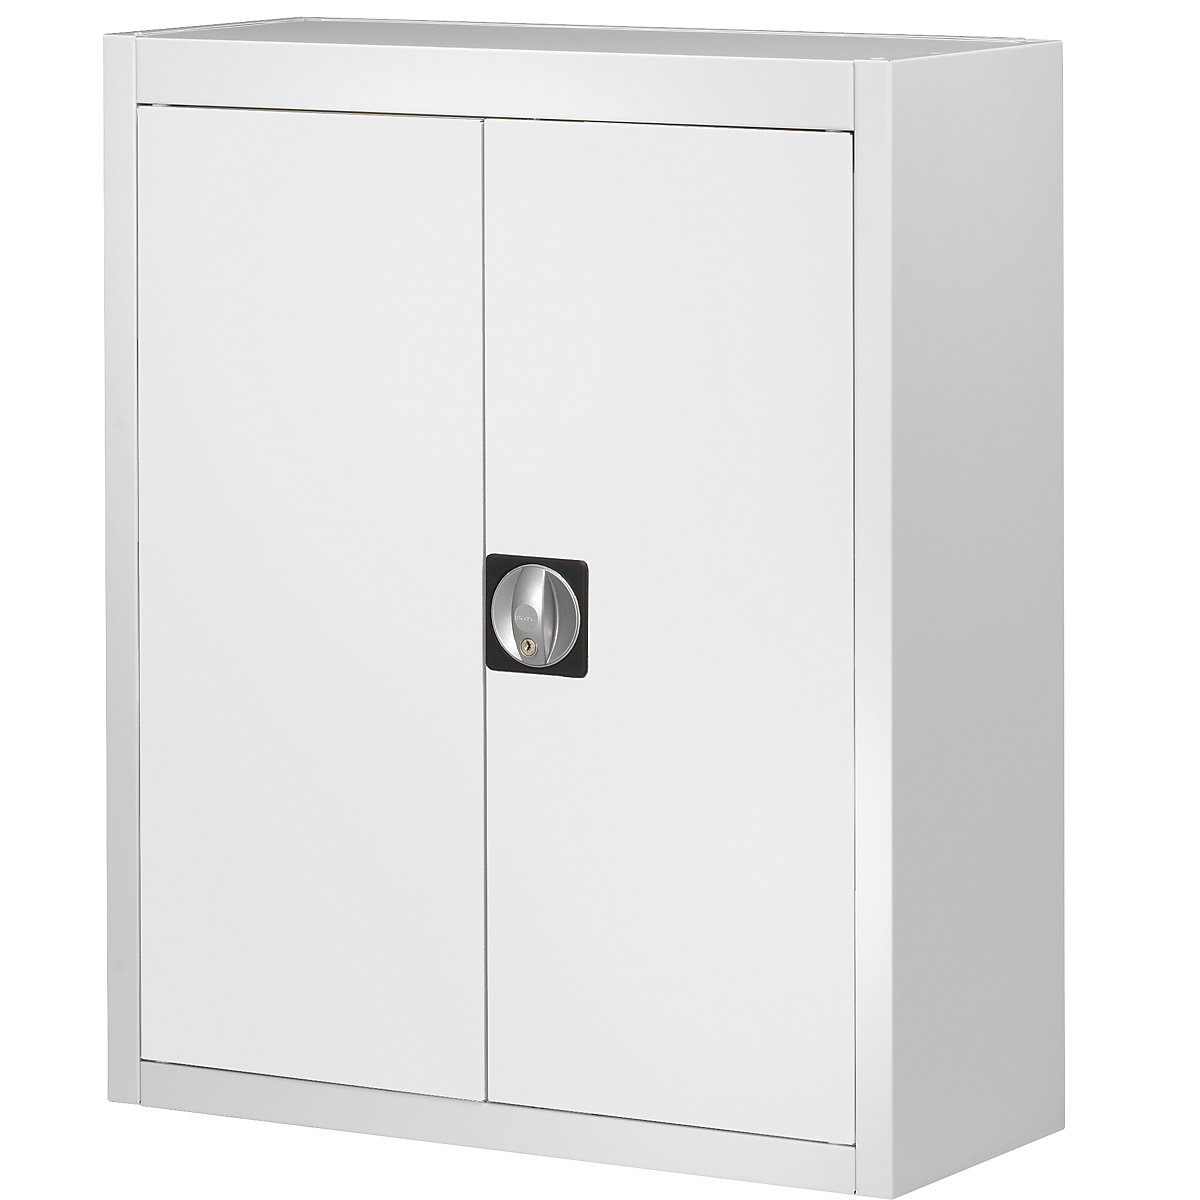 Storage cupboard, without open fronted storage bins – mauser, HxWxD 820 x 680 x 280 mm, single colour, grey, 3+ items-6